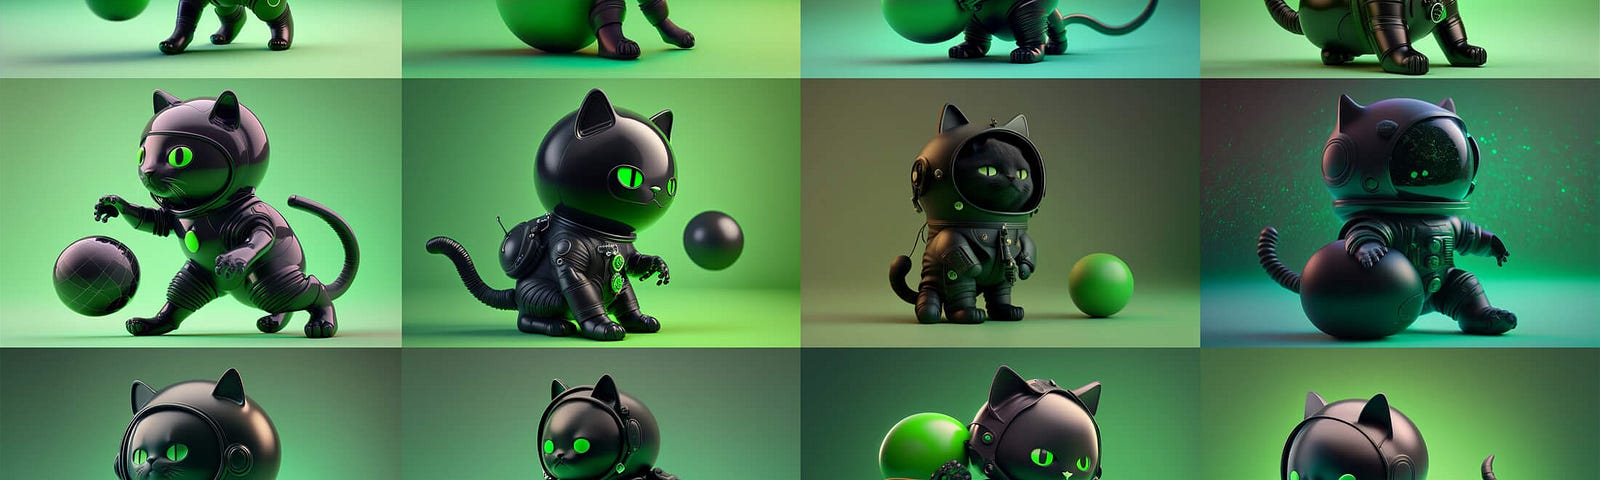 16 3D images of black cats in black space suits playing with balls